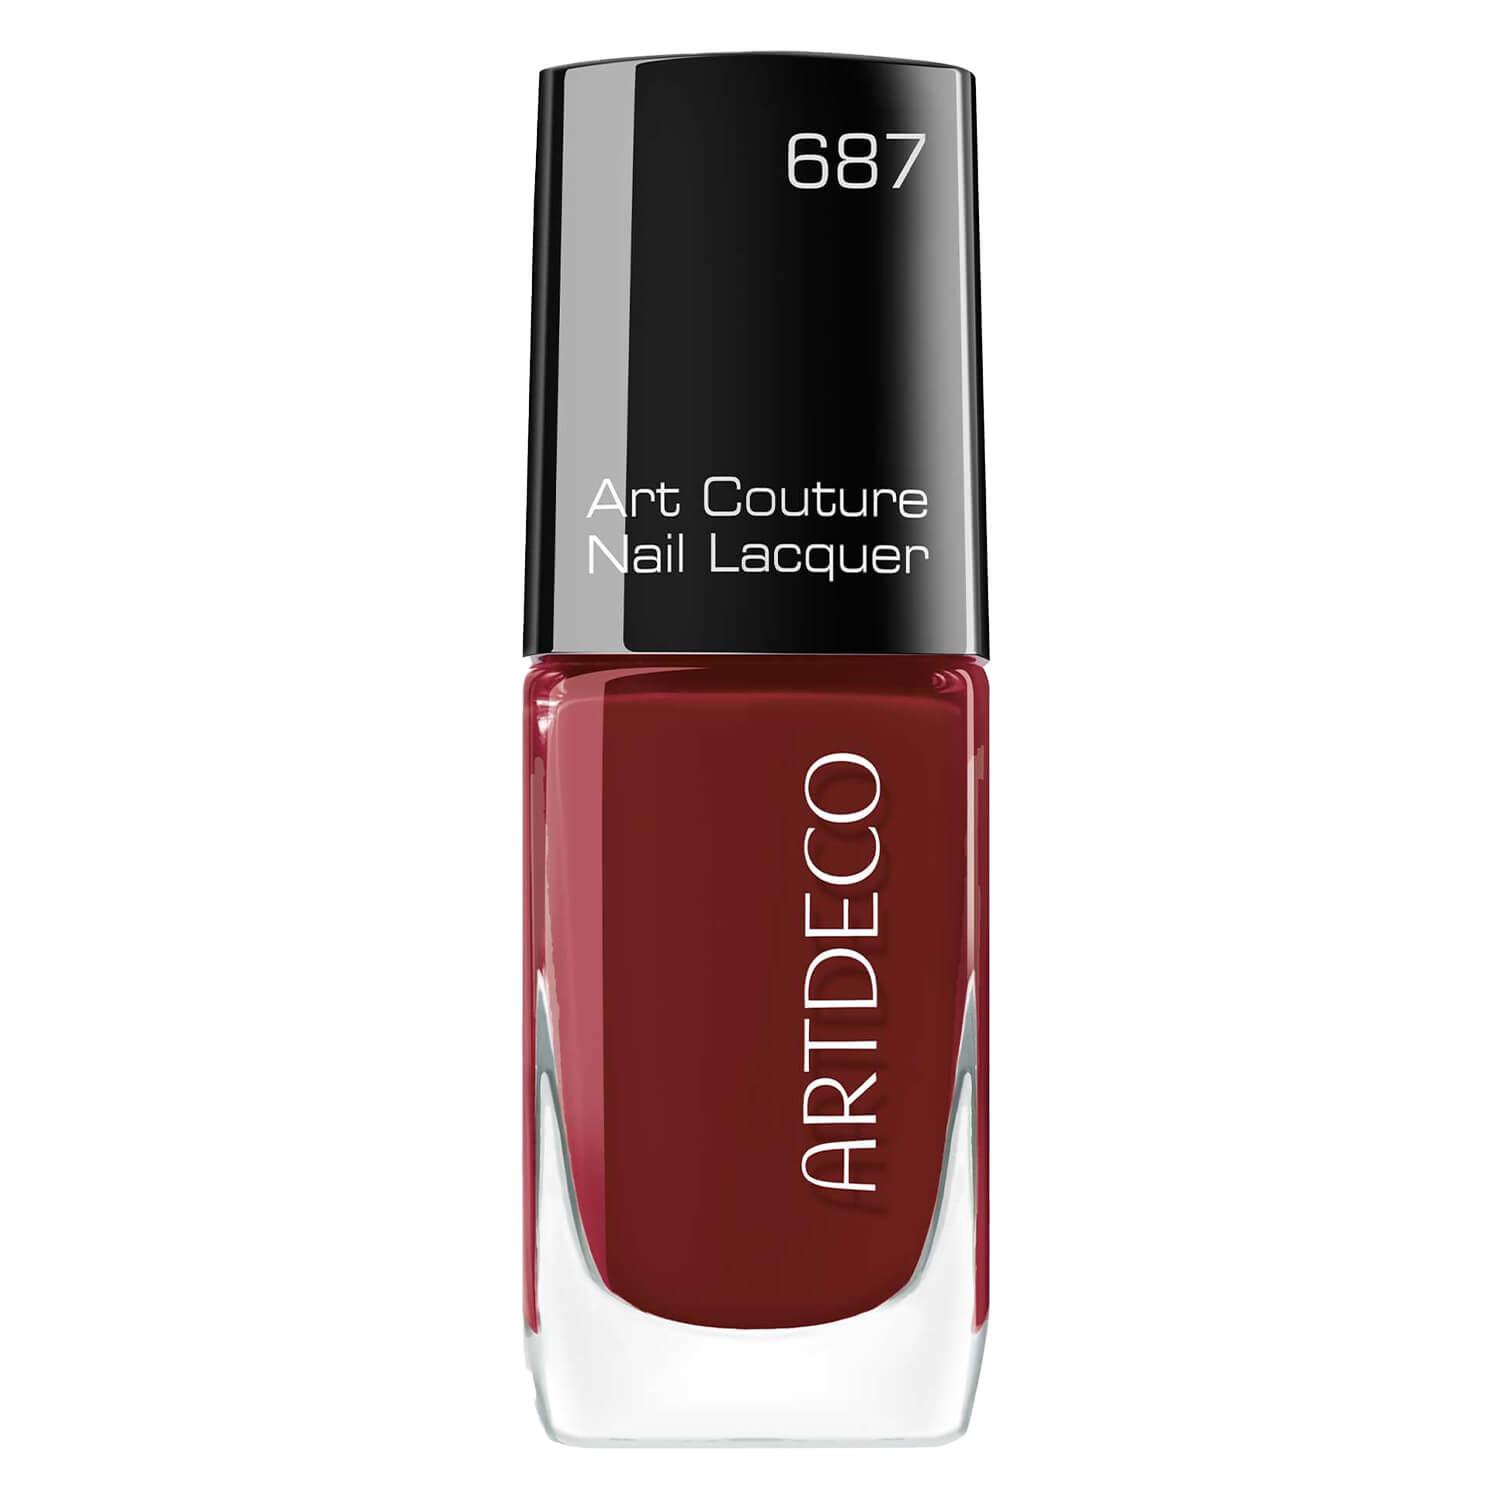 Art Couture - Nail Lacquer Red Carpet 687